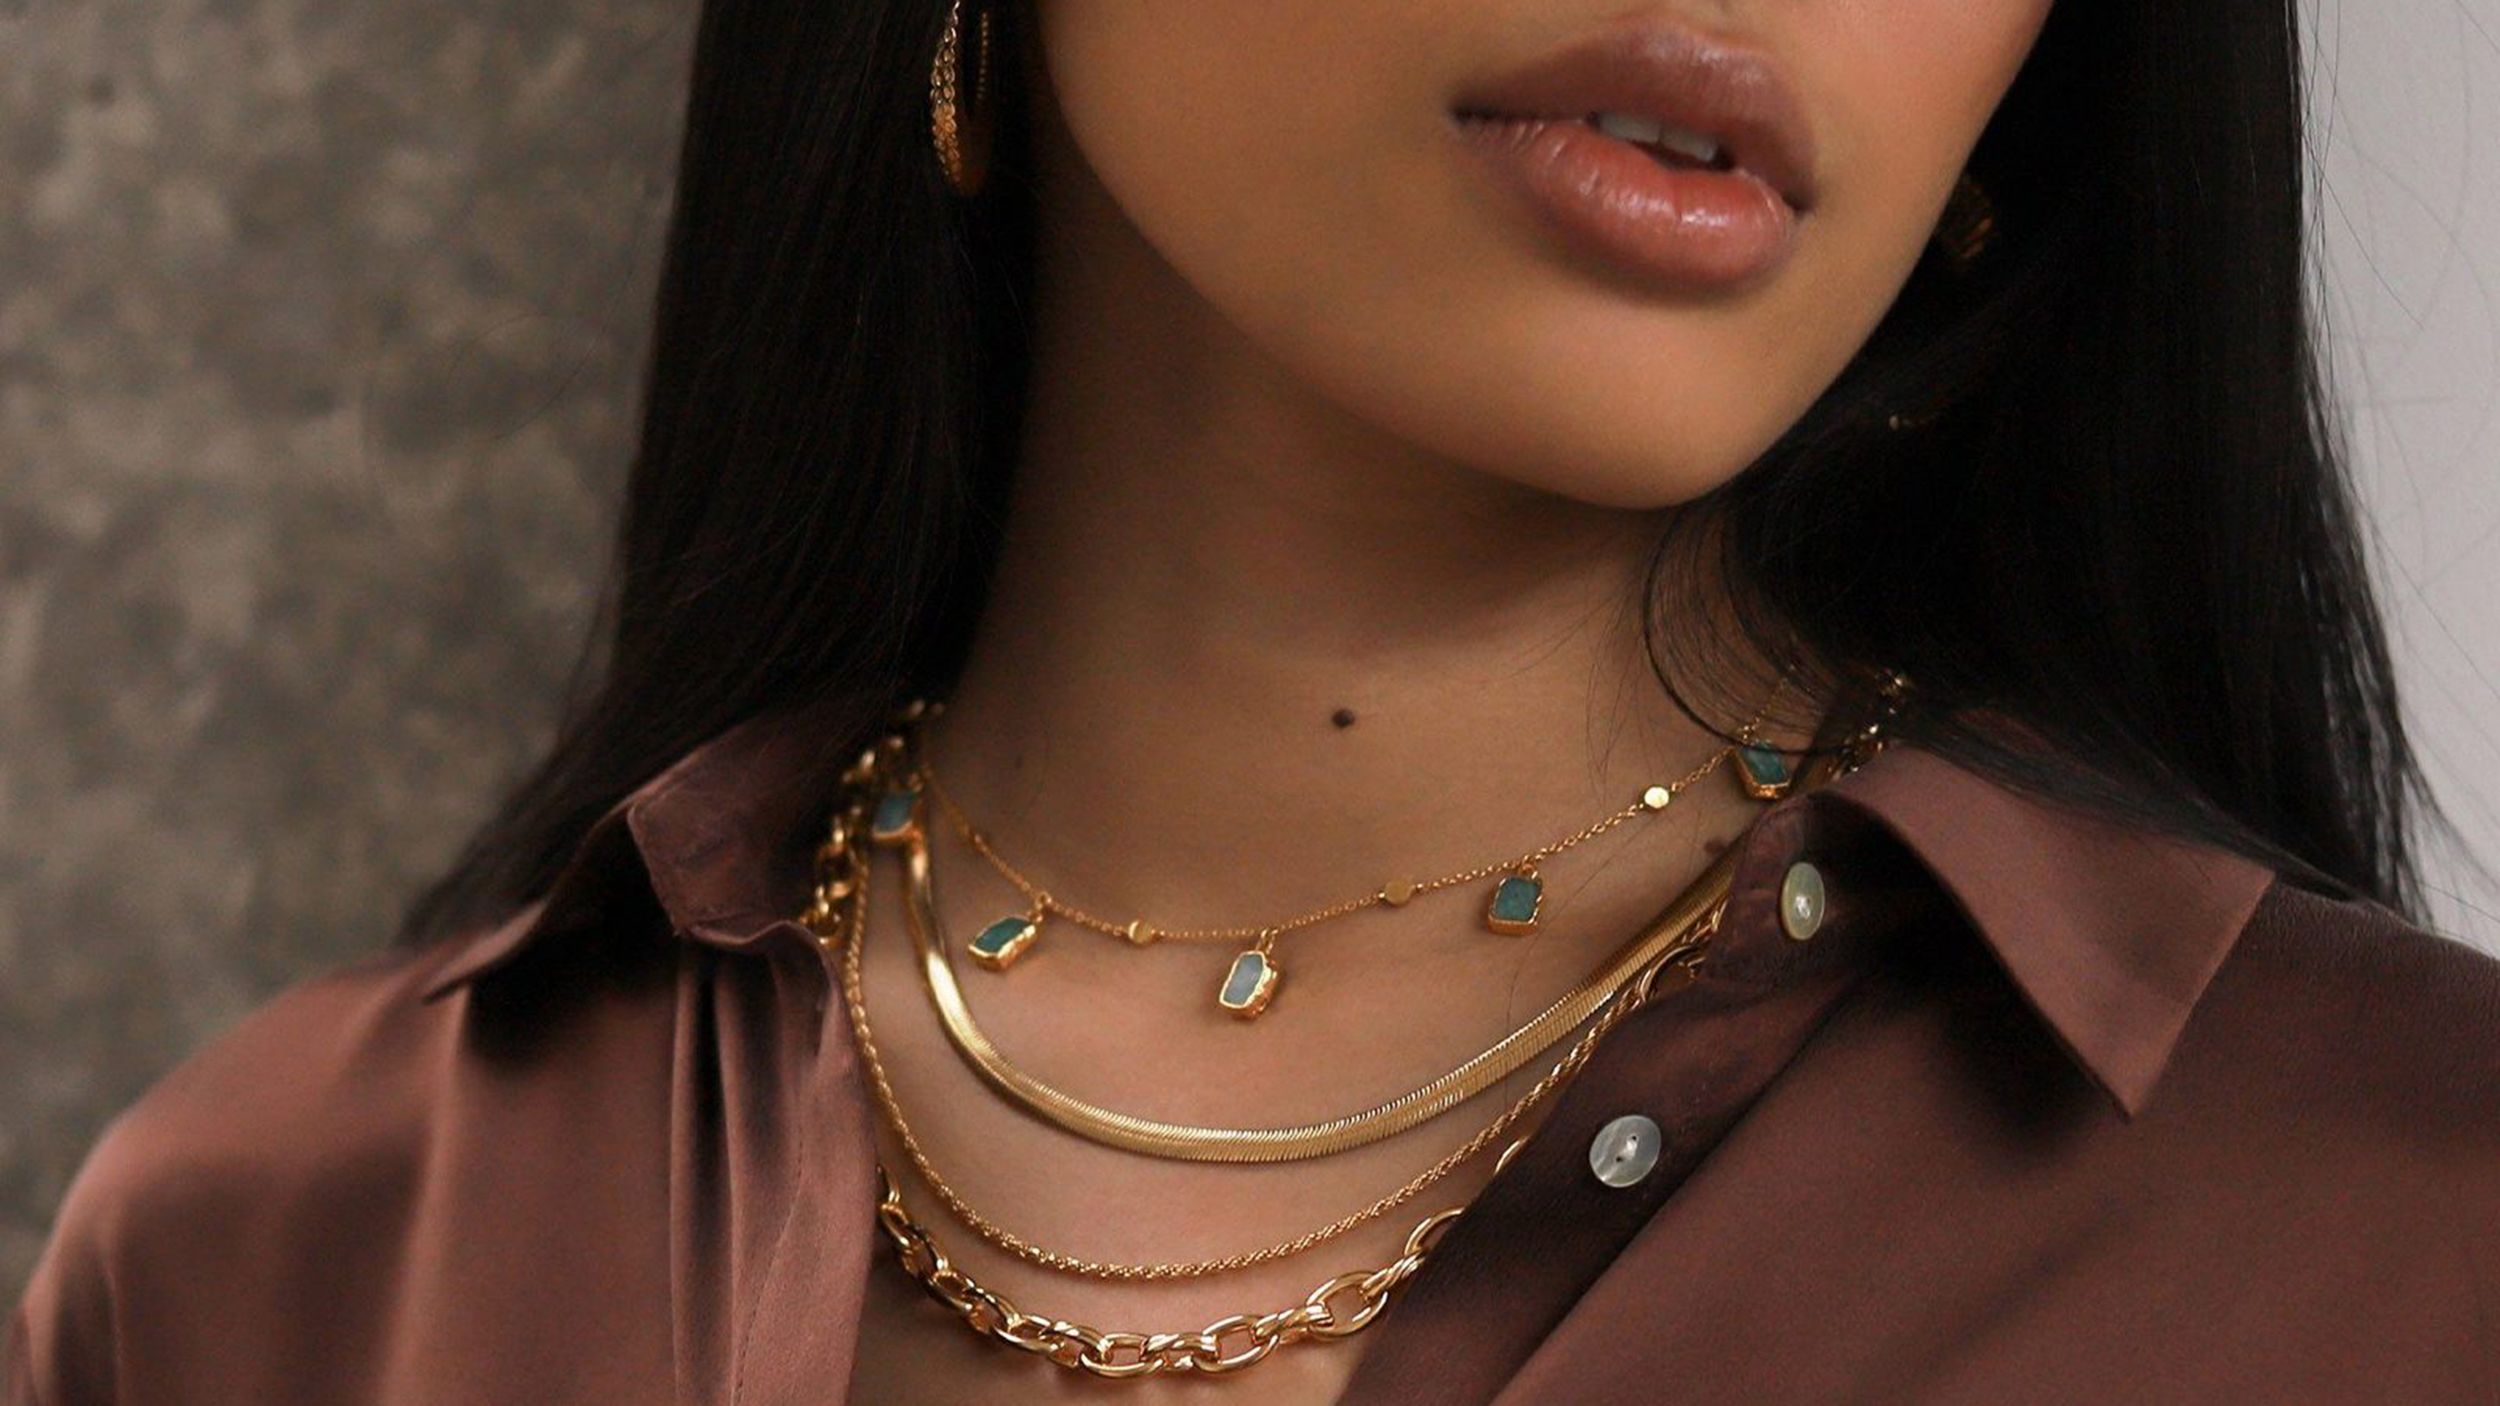 20 fake jewelry that looks real + how to buy the best fake jewelry